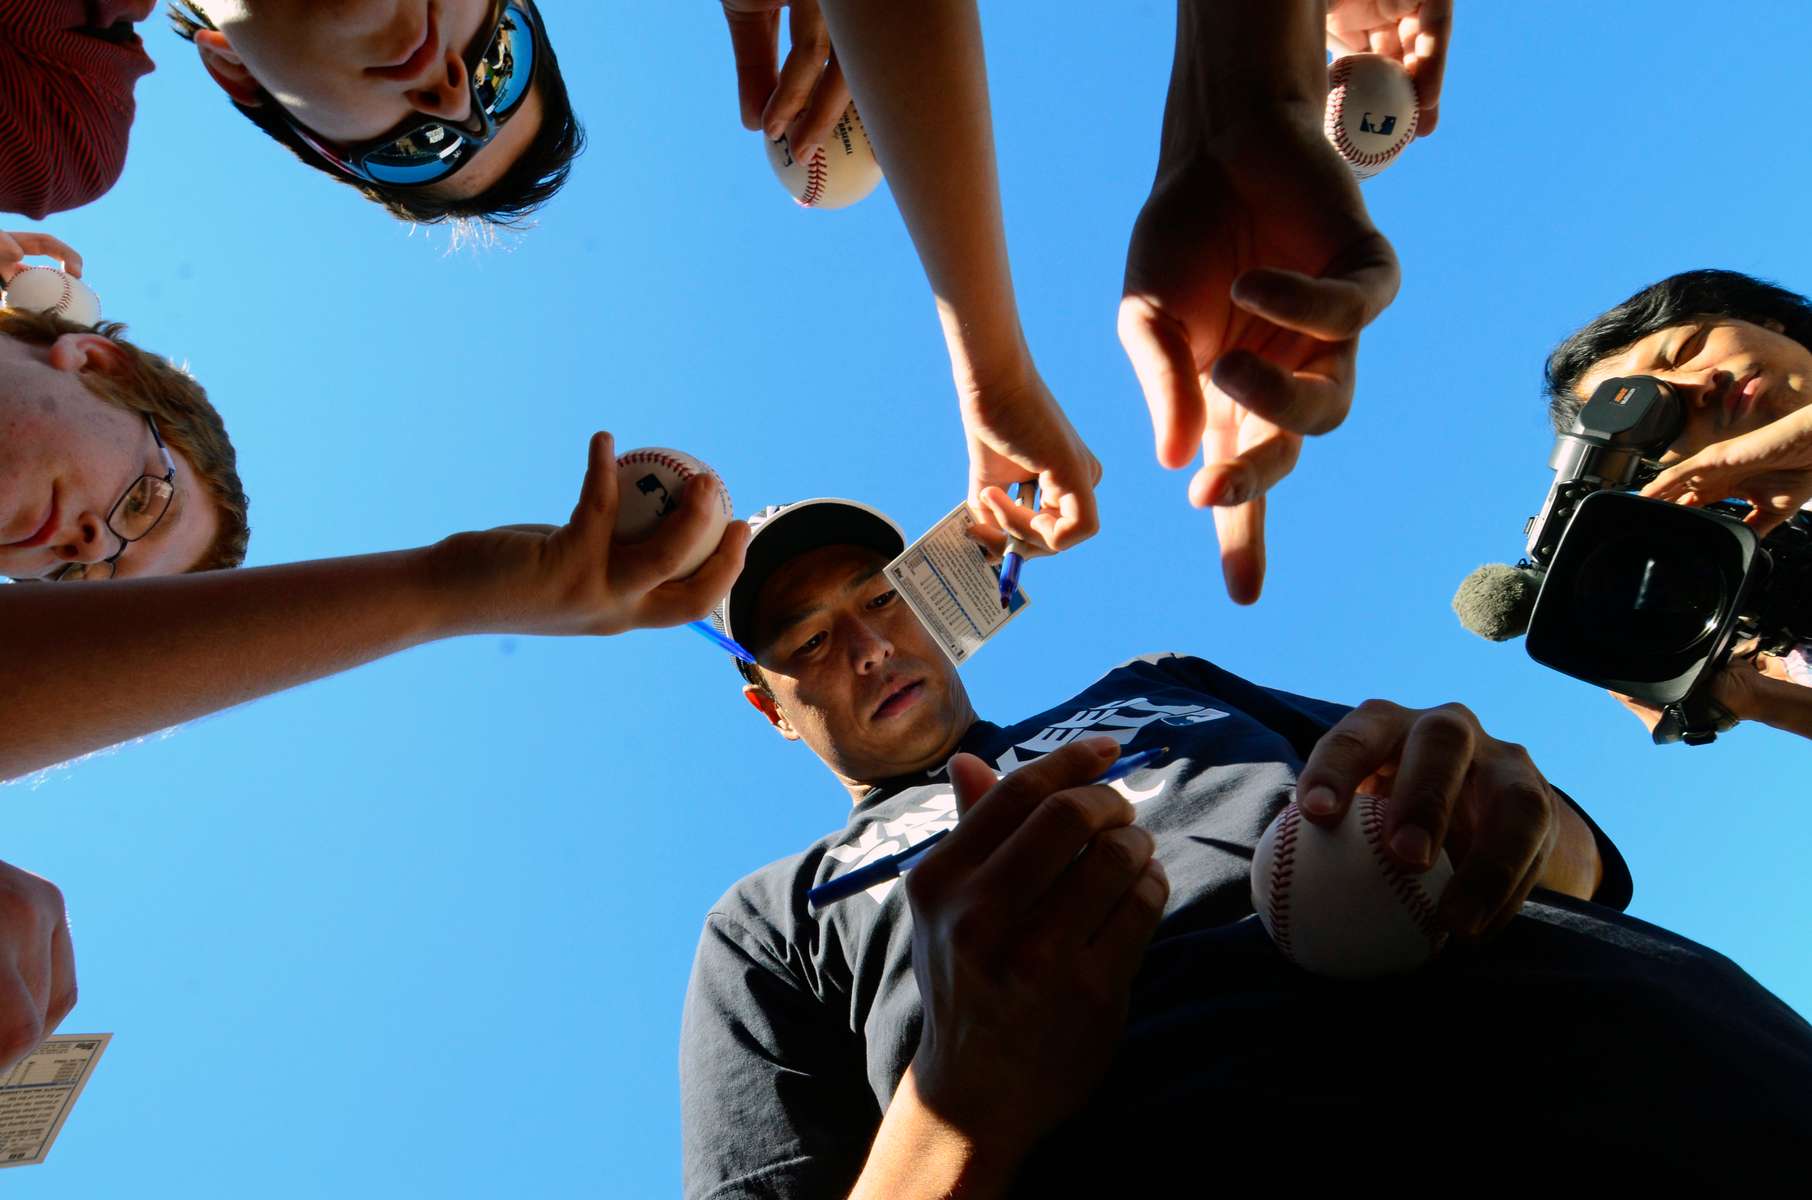 New York Yankees starting pitcher Hiroki Kuroda signs autographs after the Yankees workout on Sunday, February 16, 2014 at George M. Steinbrenner Field in Tampa, Fla.